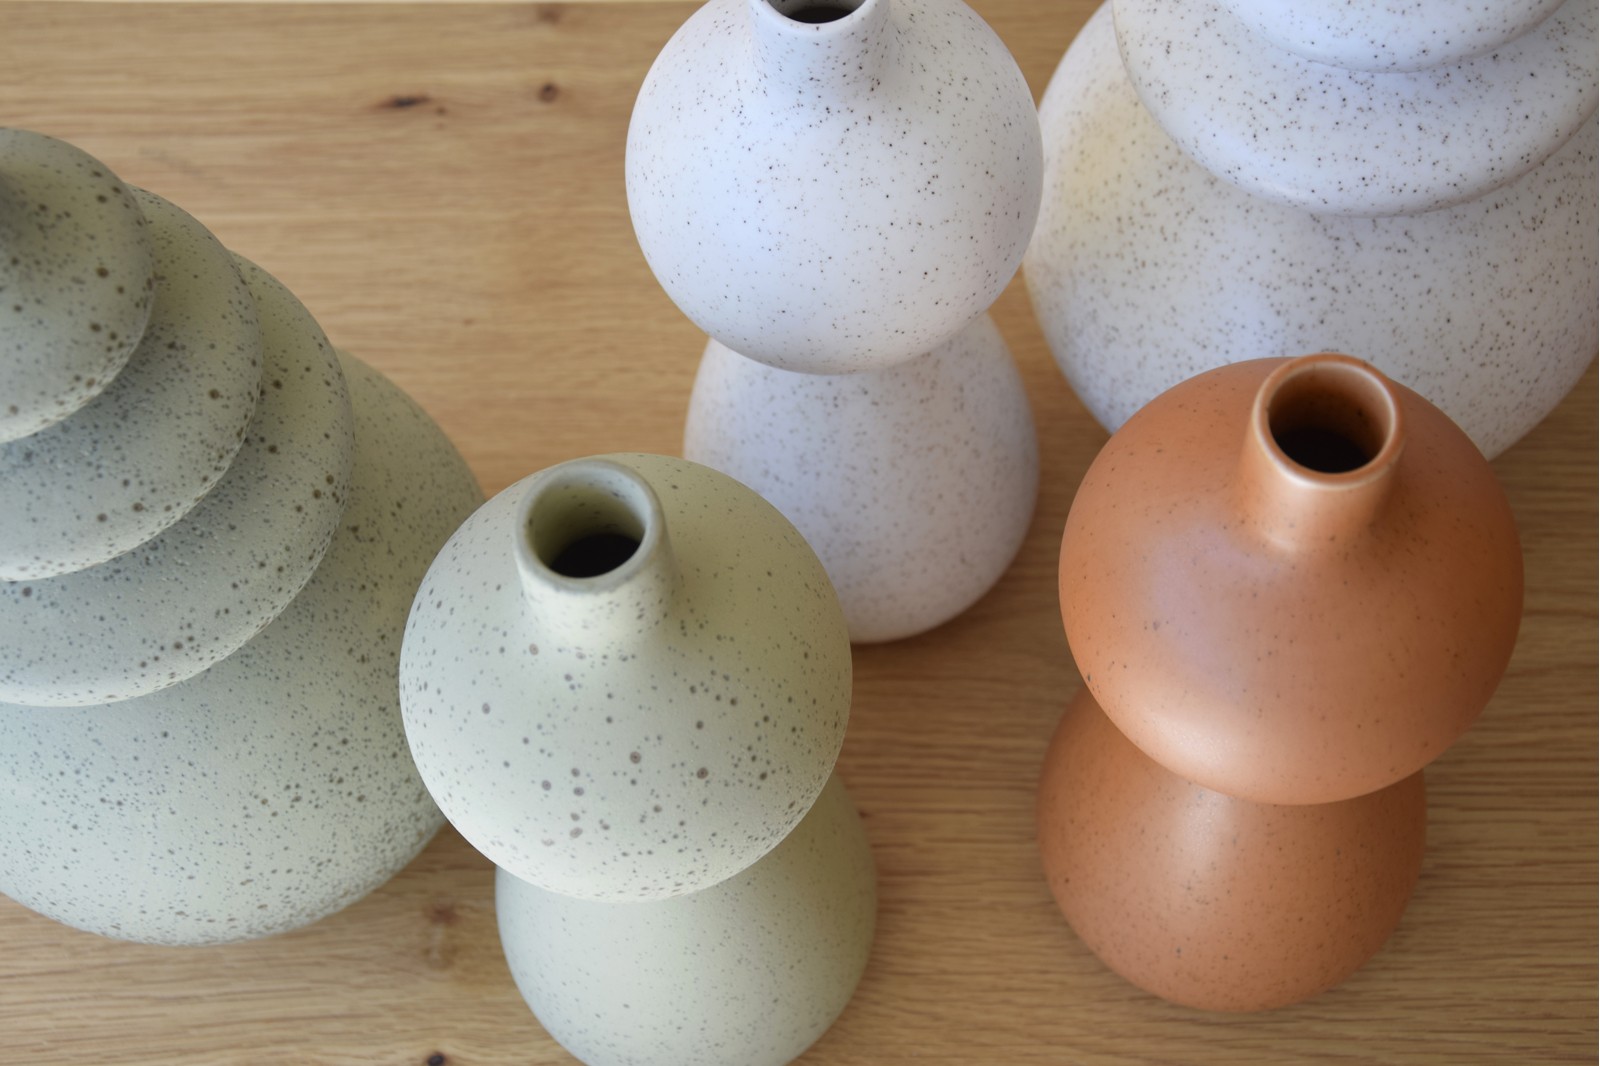 SPECKLE EARTH COLLECTION: CERAMIC VASES